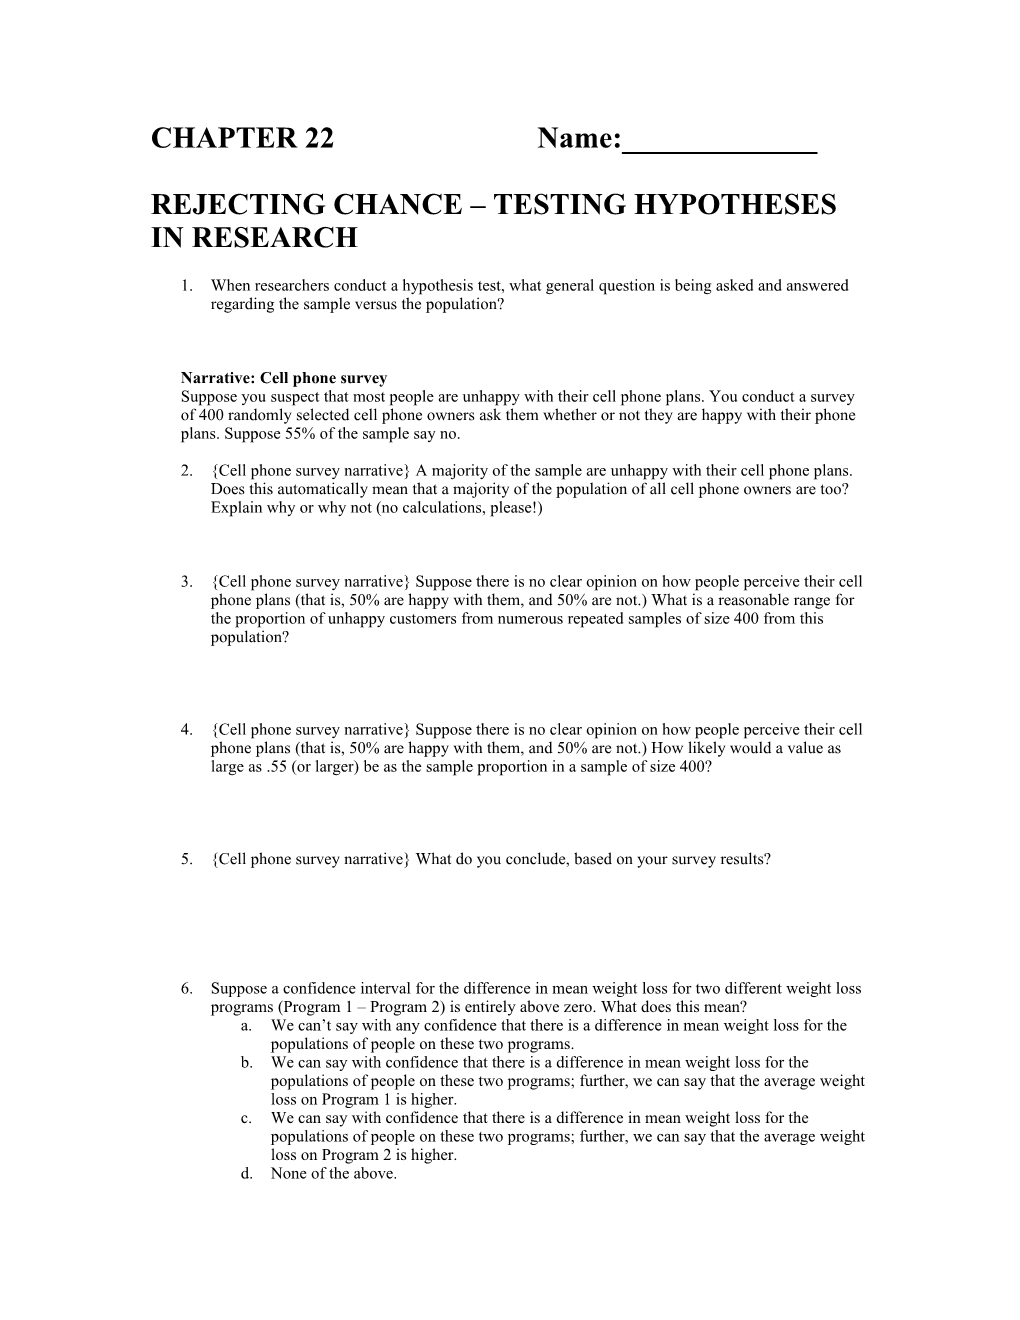 Rejecting Chance Testing Hypotheses in Research